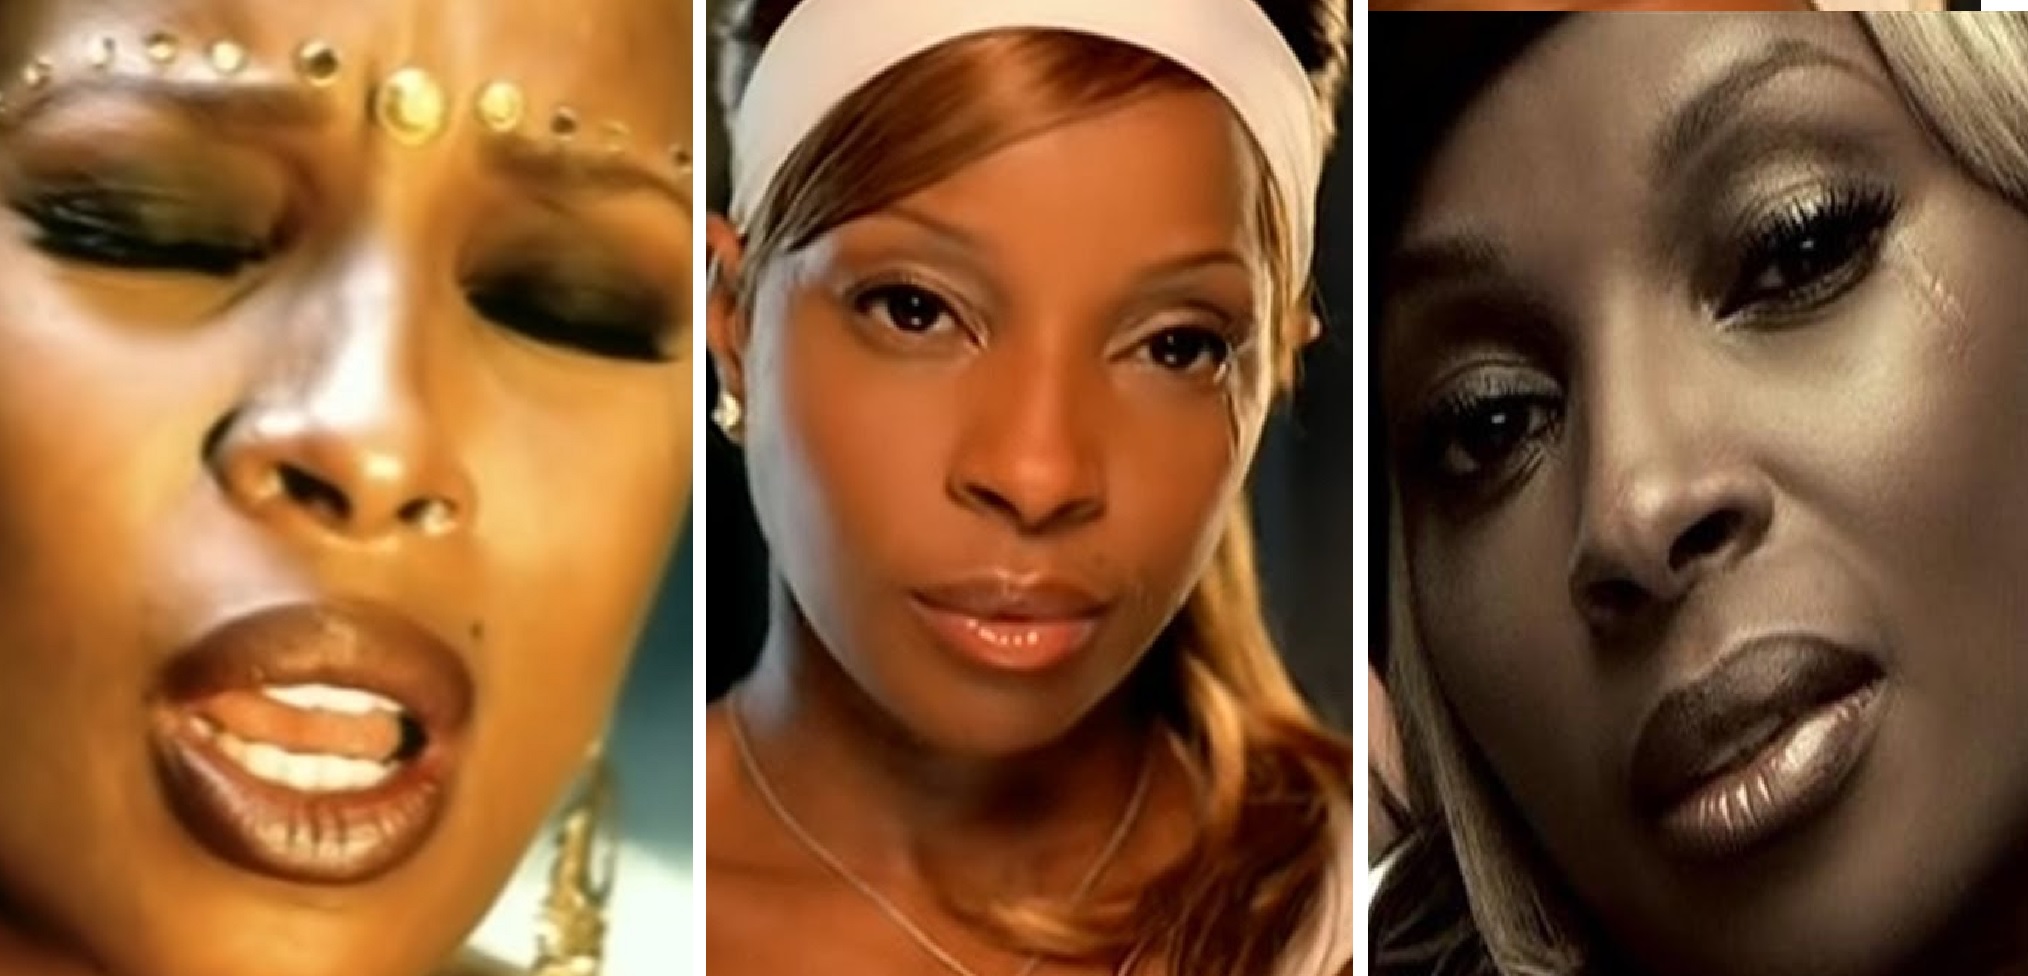 The Top Ten Songs by Mary J. Blige – The Queen of Hip-Hop/Soul